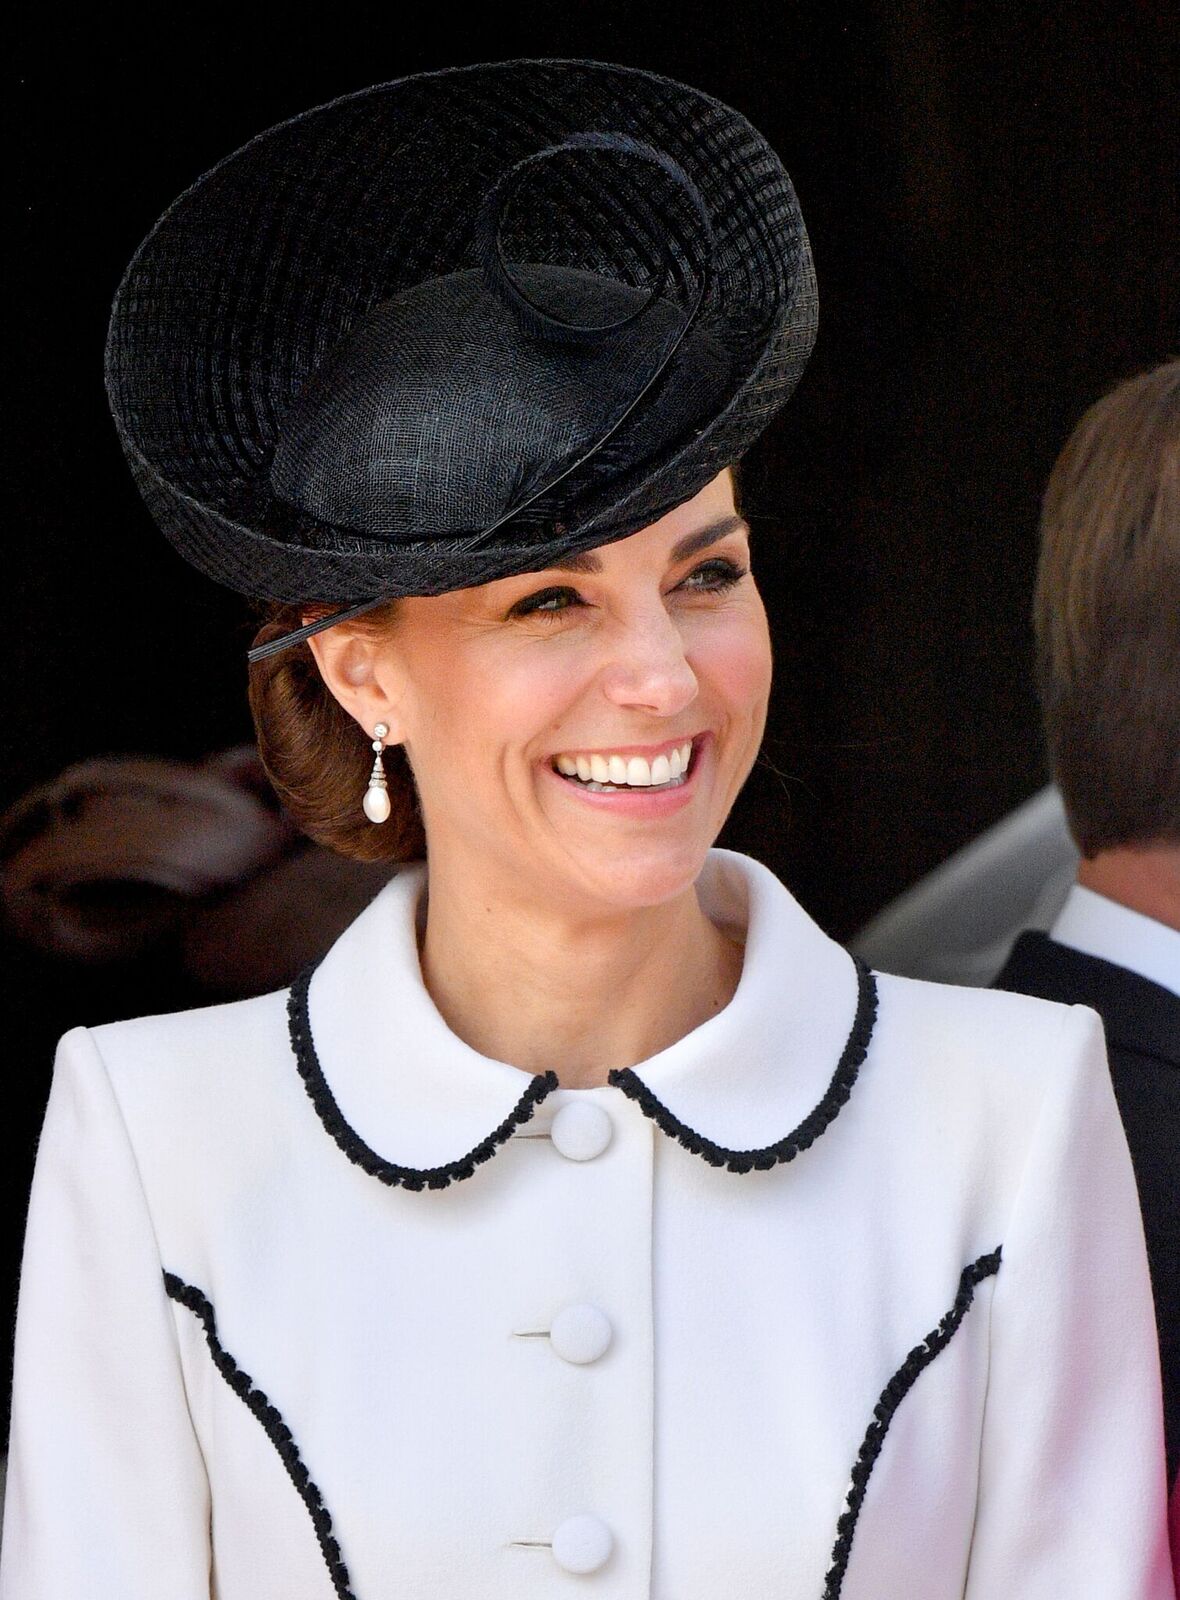 Catherine, Duchess of Cambridge attends the Order of the Garter service at St George's Chapel on June 17, 2019 | Photo: Getty Images